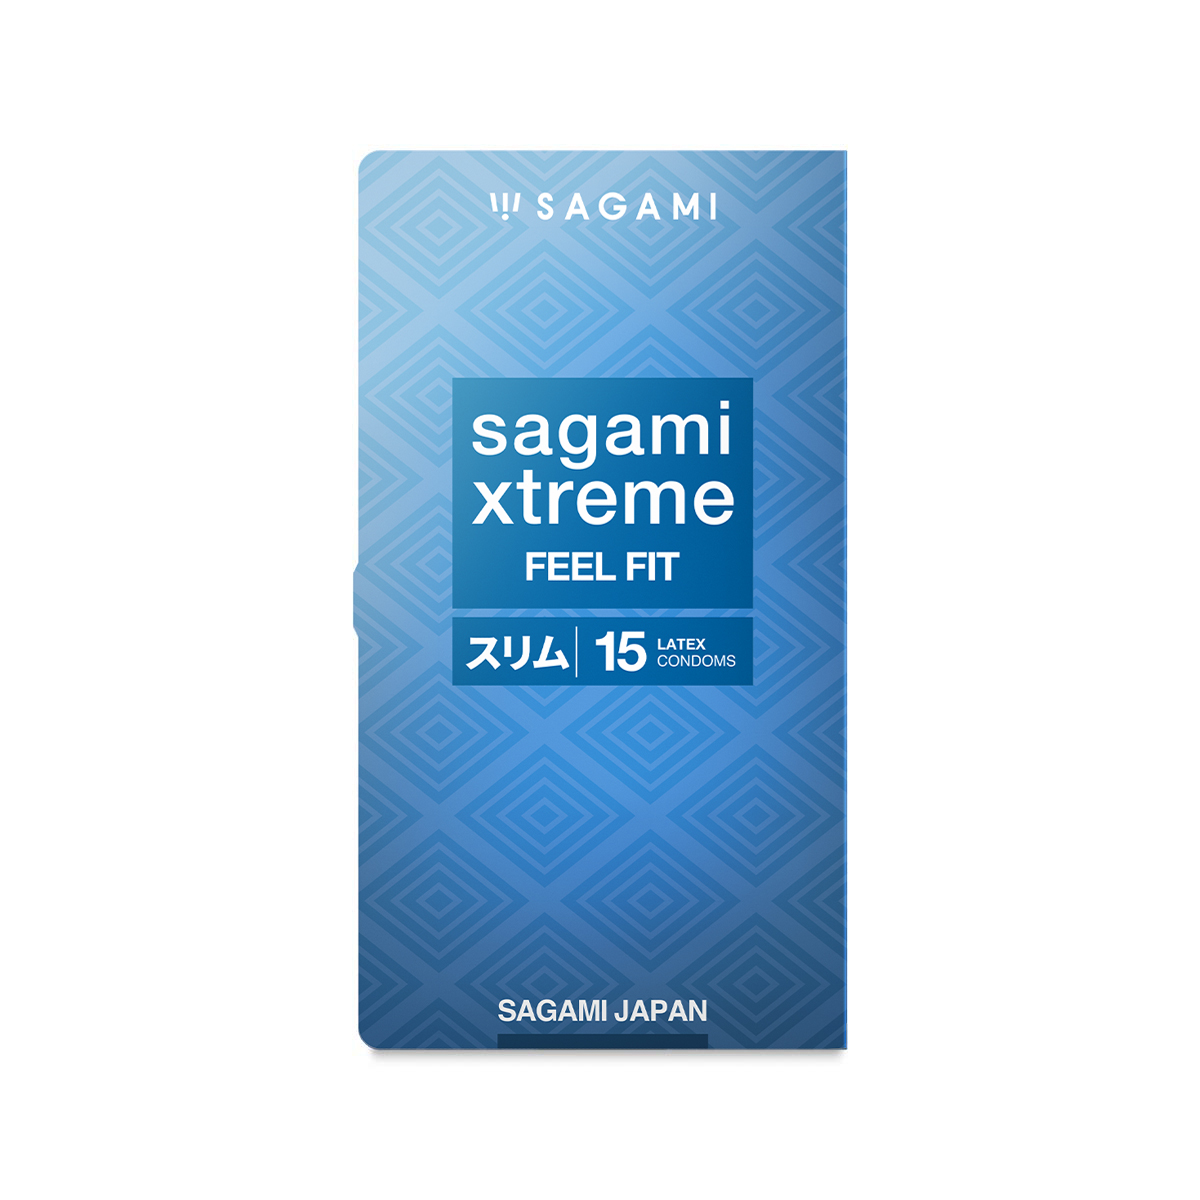 Sagami Xtreme Feel Fit 15s